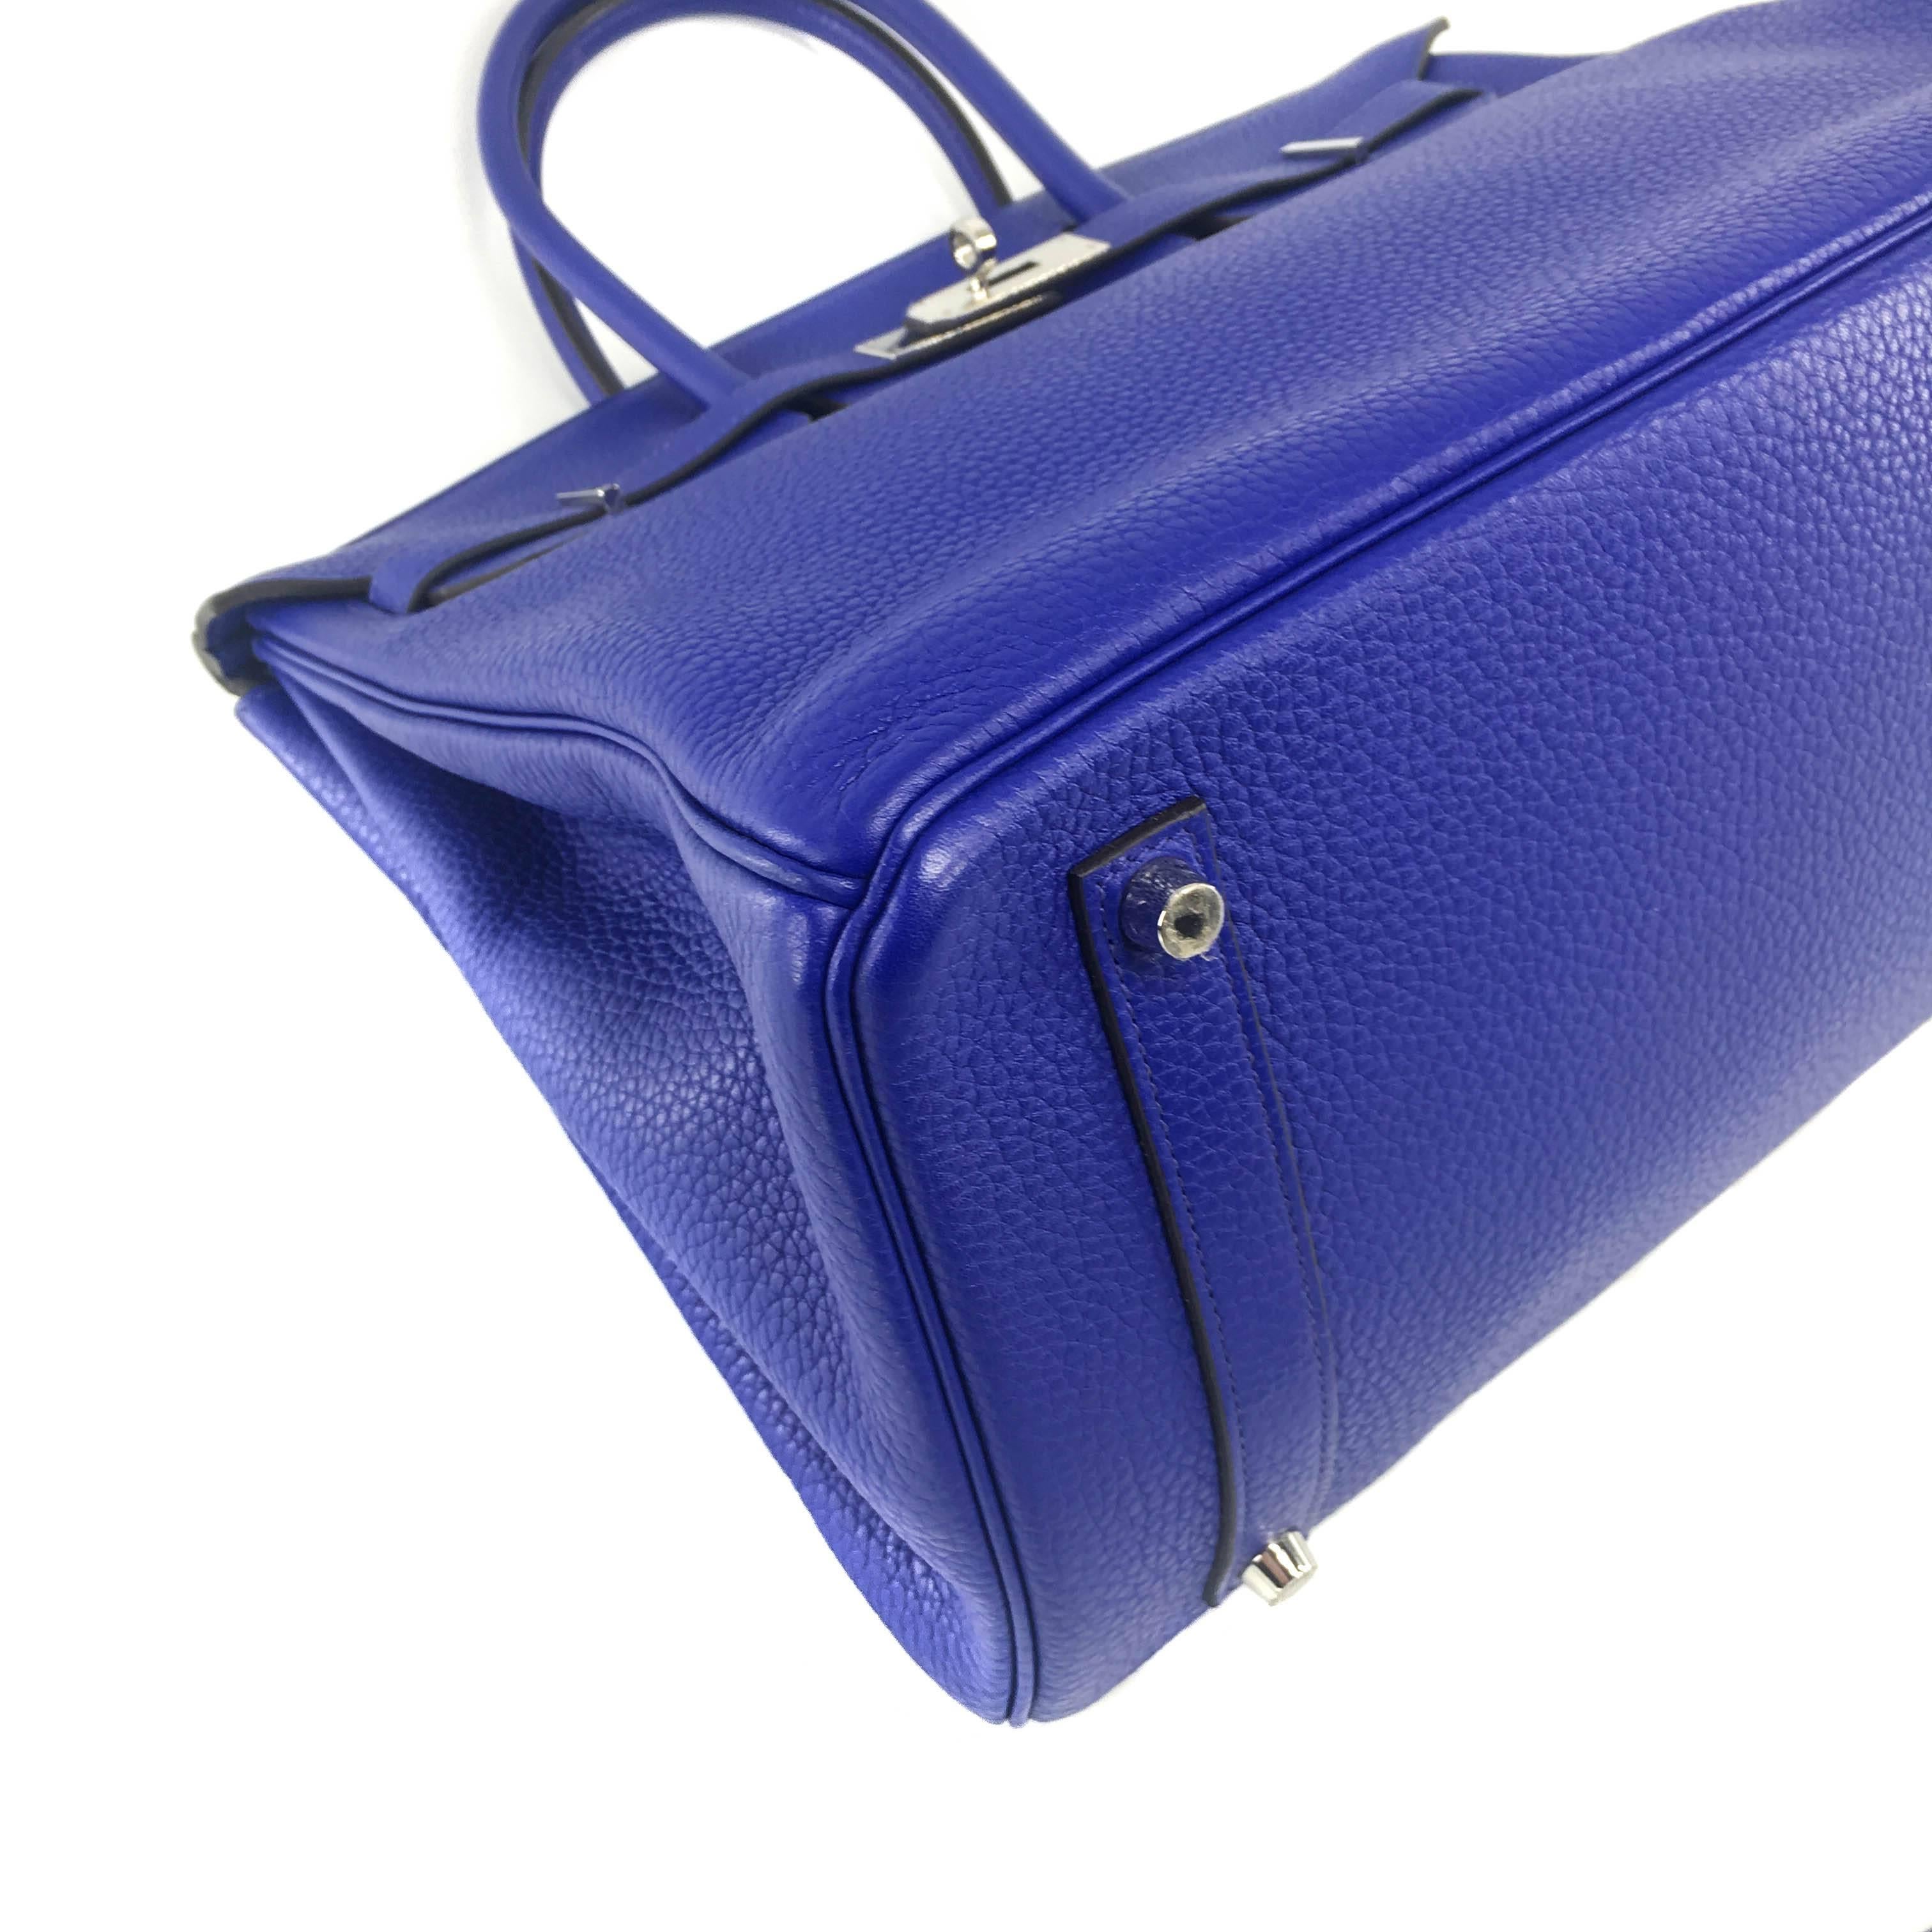 Hermes Birkin 35 Togo leather Blue Electric PHW For Sale 3